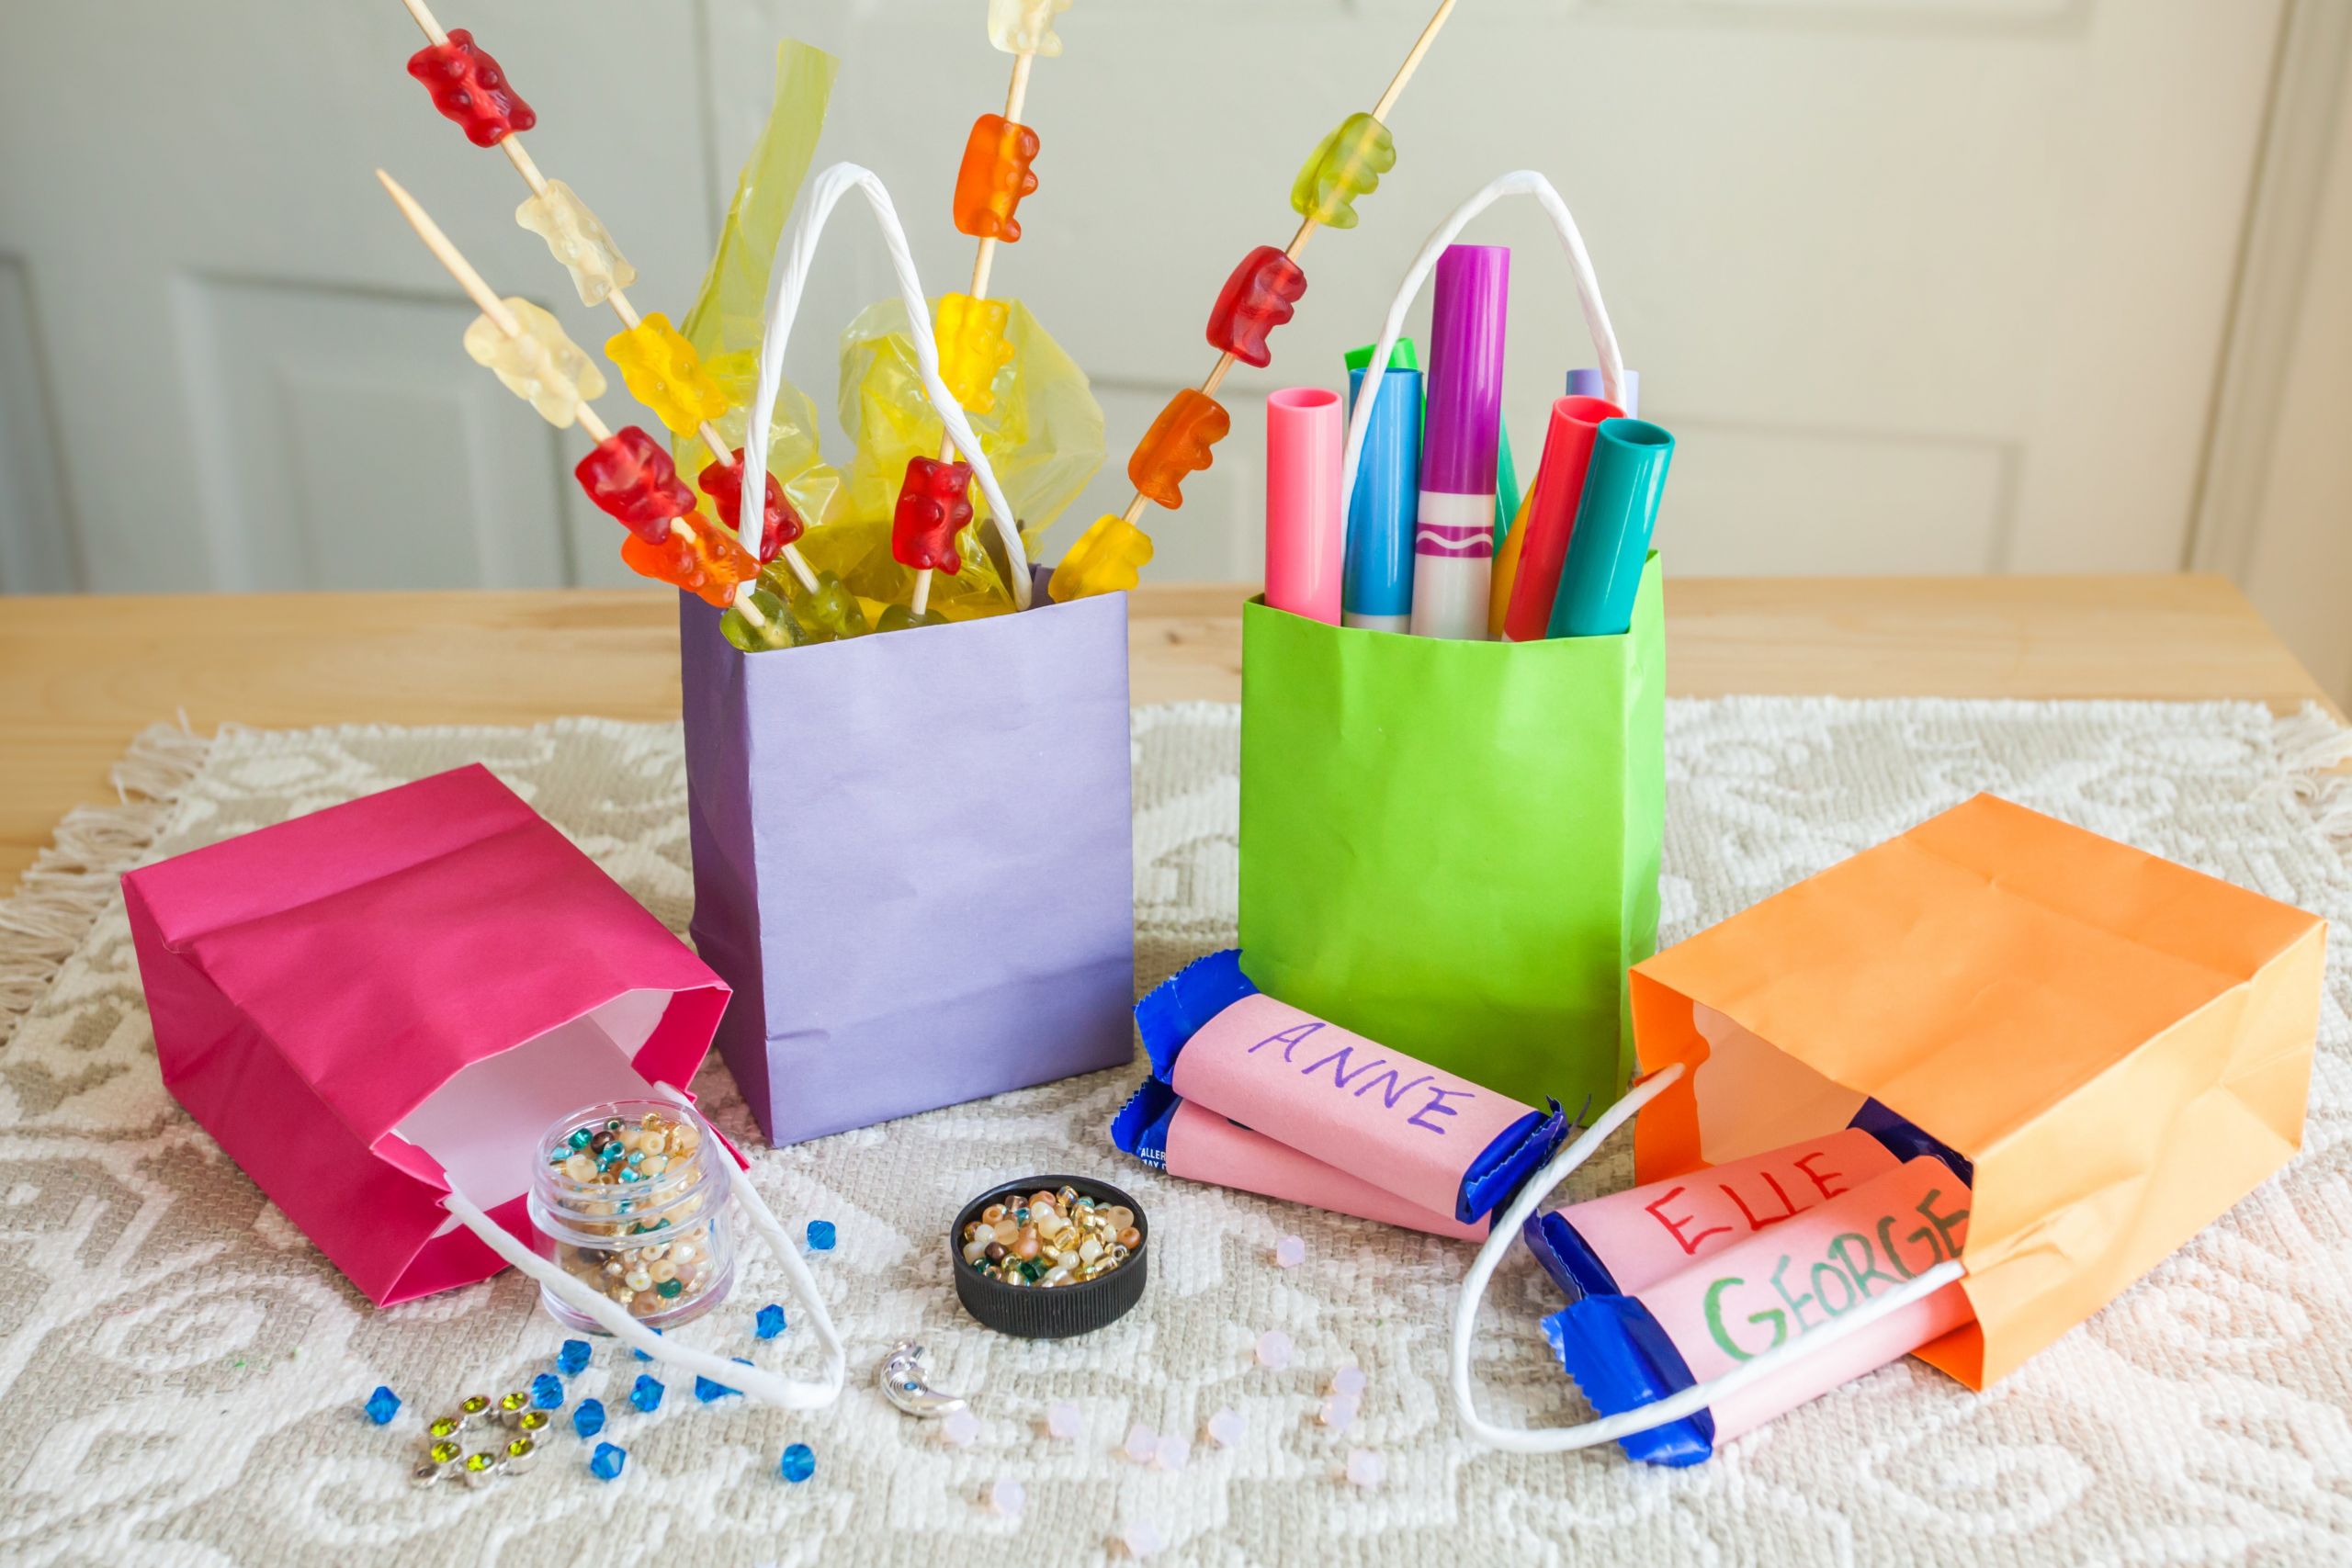 Birthday Party Bag Ideas
 Ideas for Kids Birthday Party Gift Bags with